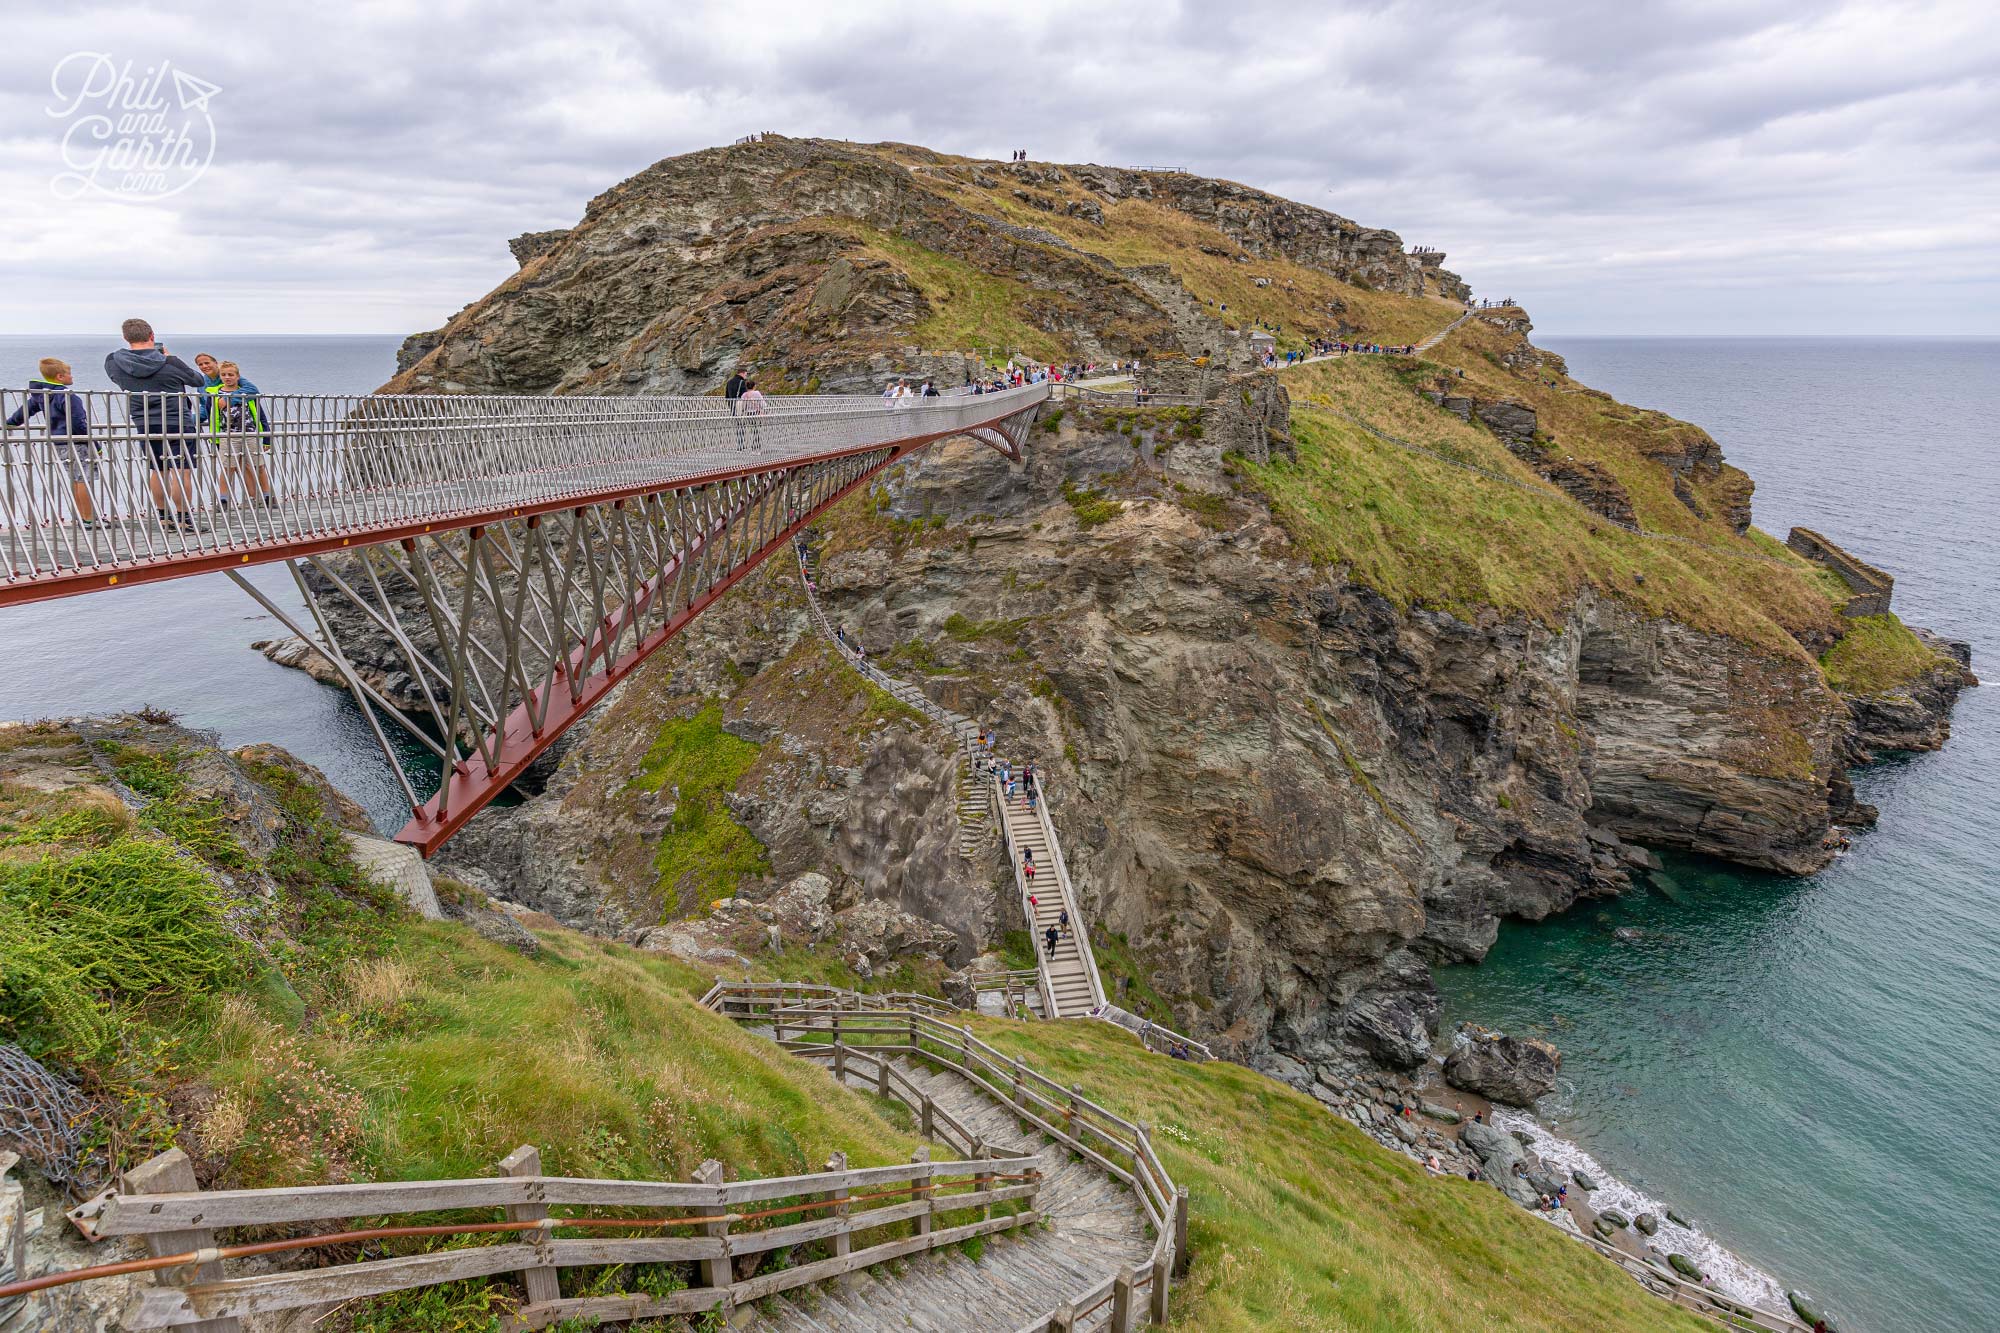 The dramatic 13th century ruins of Tintagel Castle sit on a large peninsula island